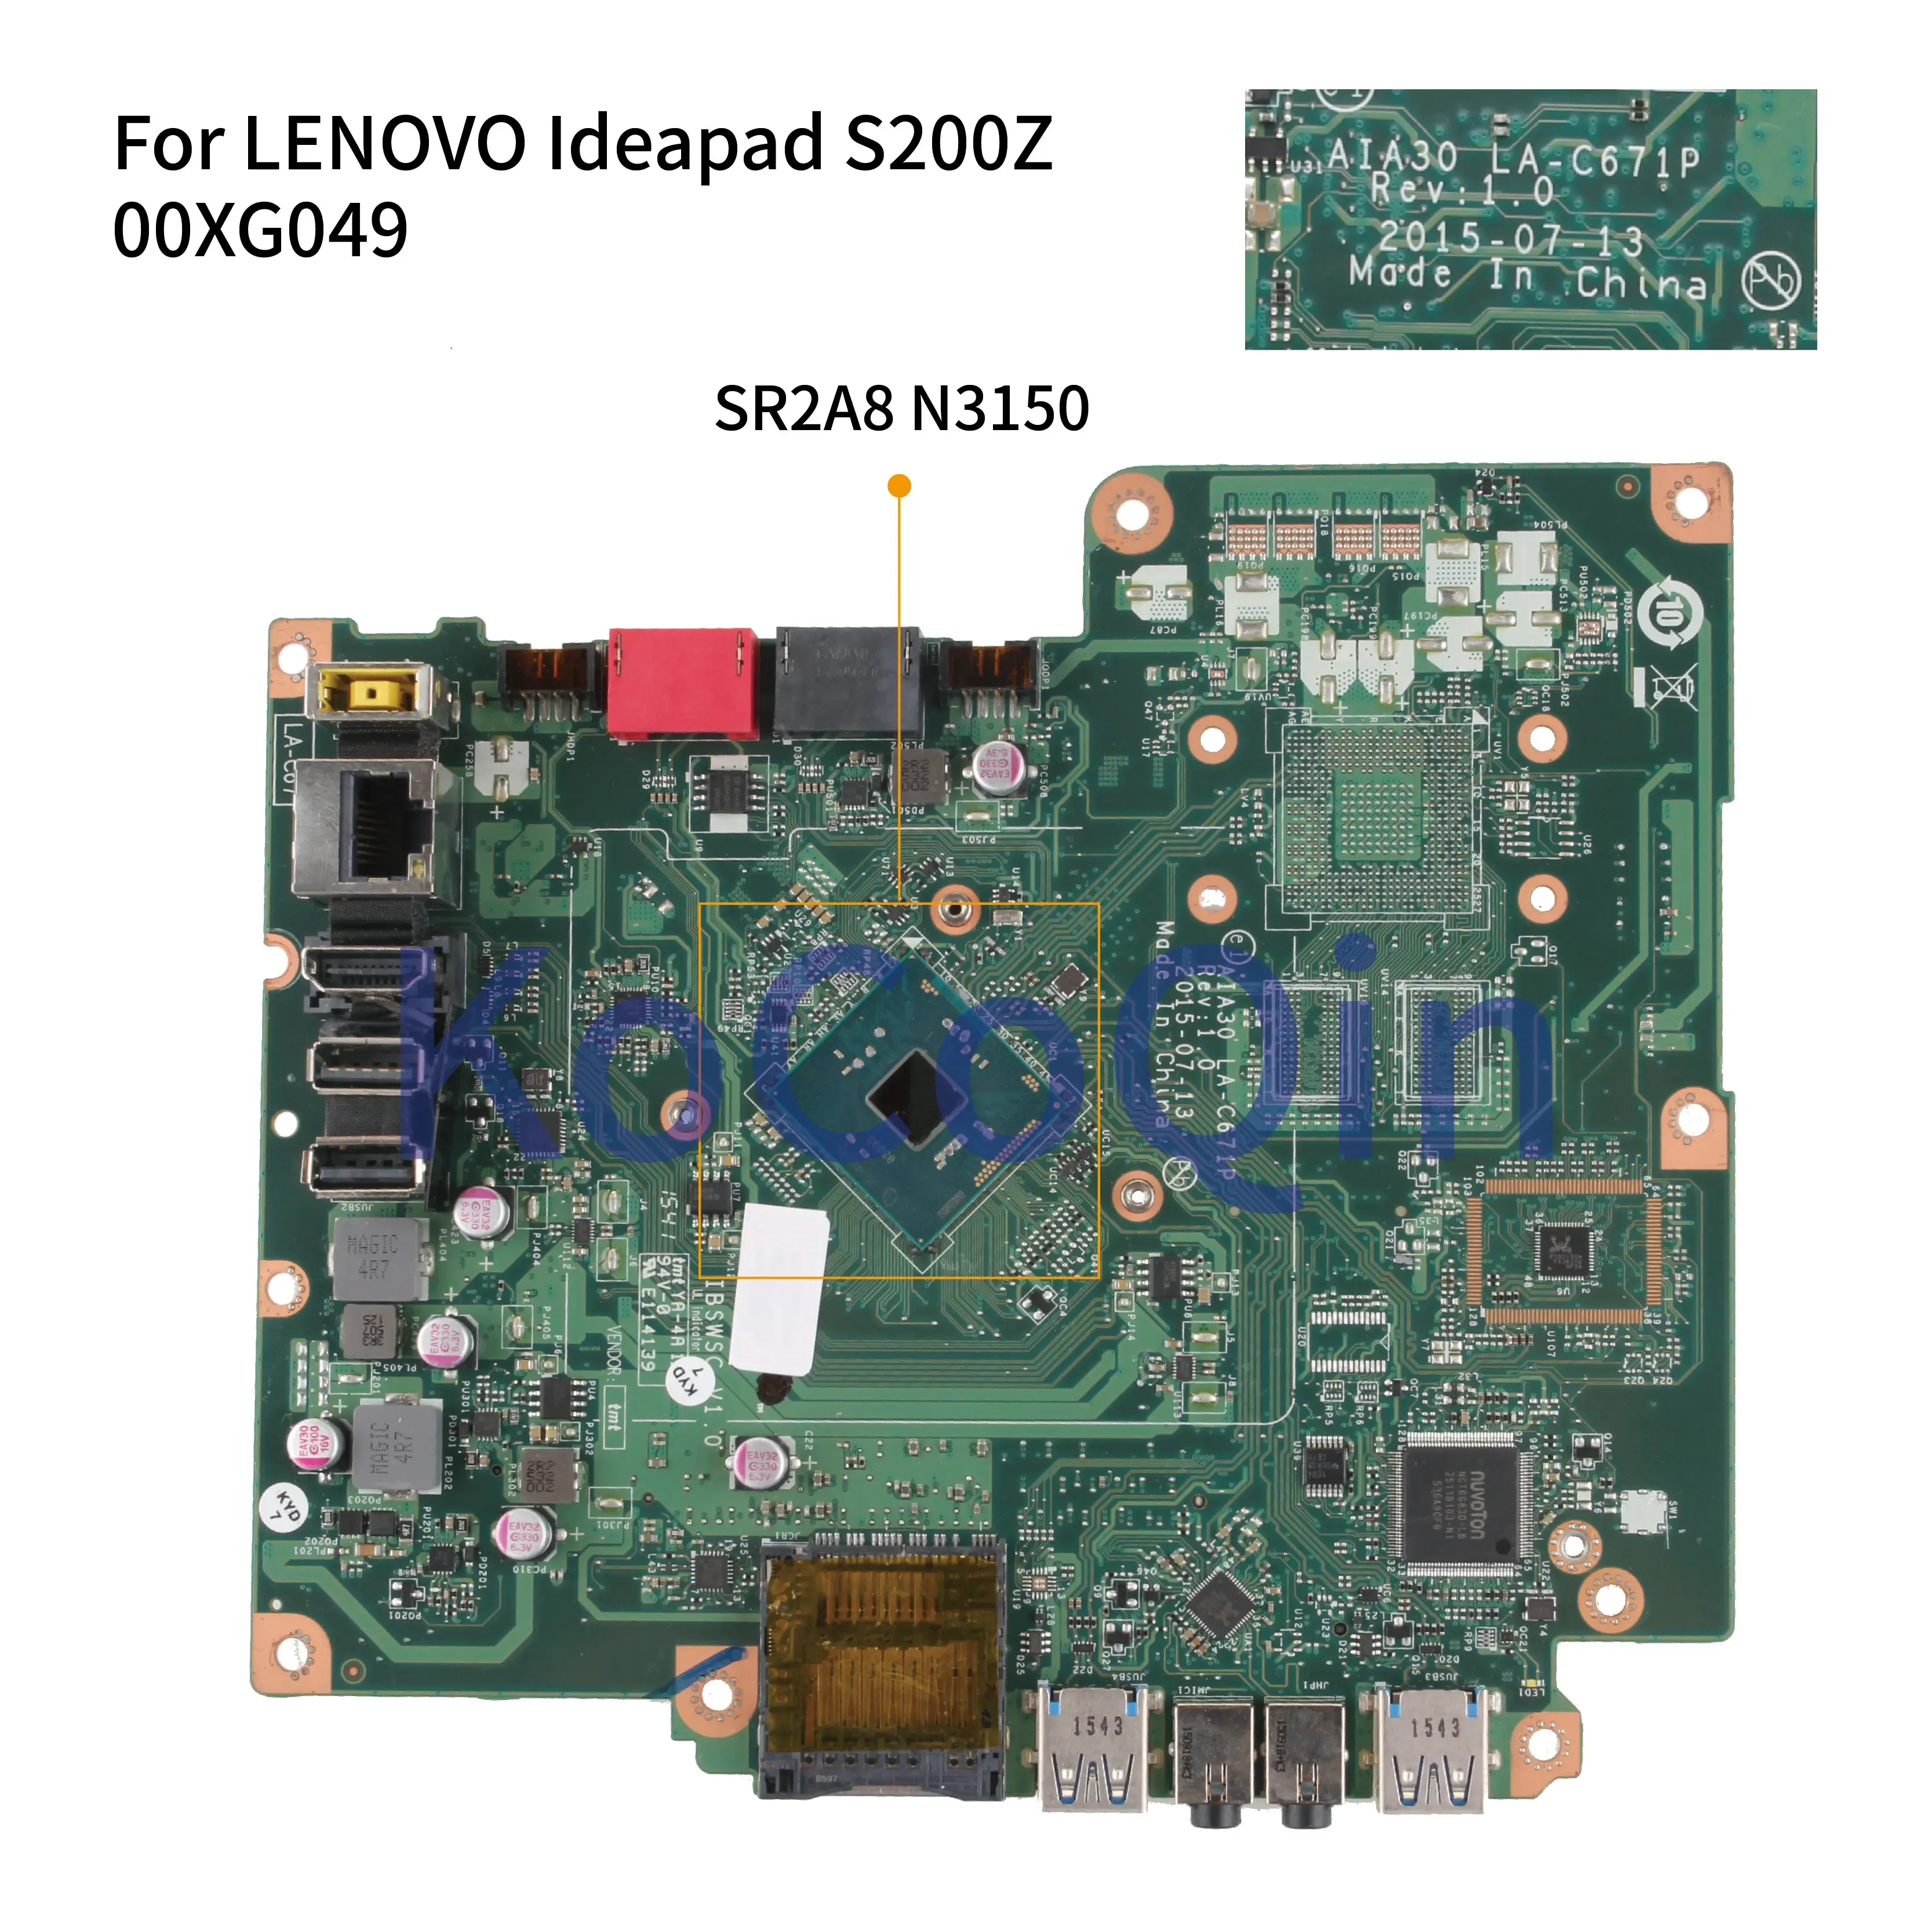 Motherboard Kocoqin Laptop Motherboard für Lenovo IdeaPad S200Z C2000 AIO Mainboard 00xg049 IBSWSC AIA30 LAC671P SR2A8 N3150 CPU